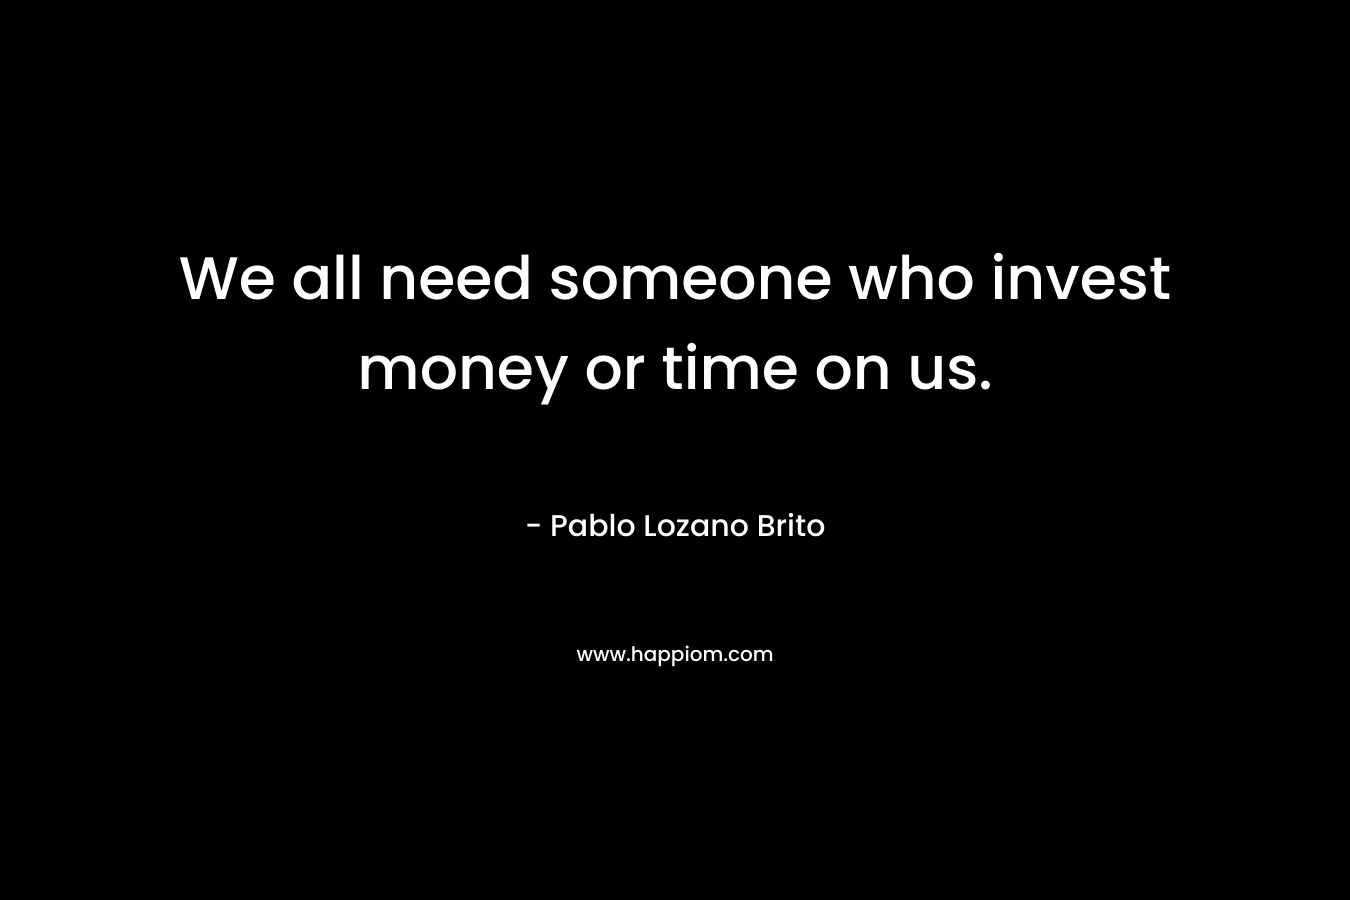 We all need someone who invest money or time on us.